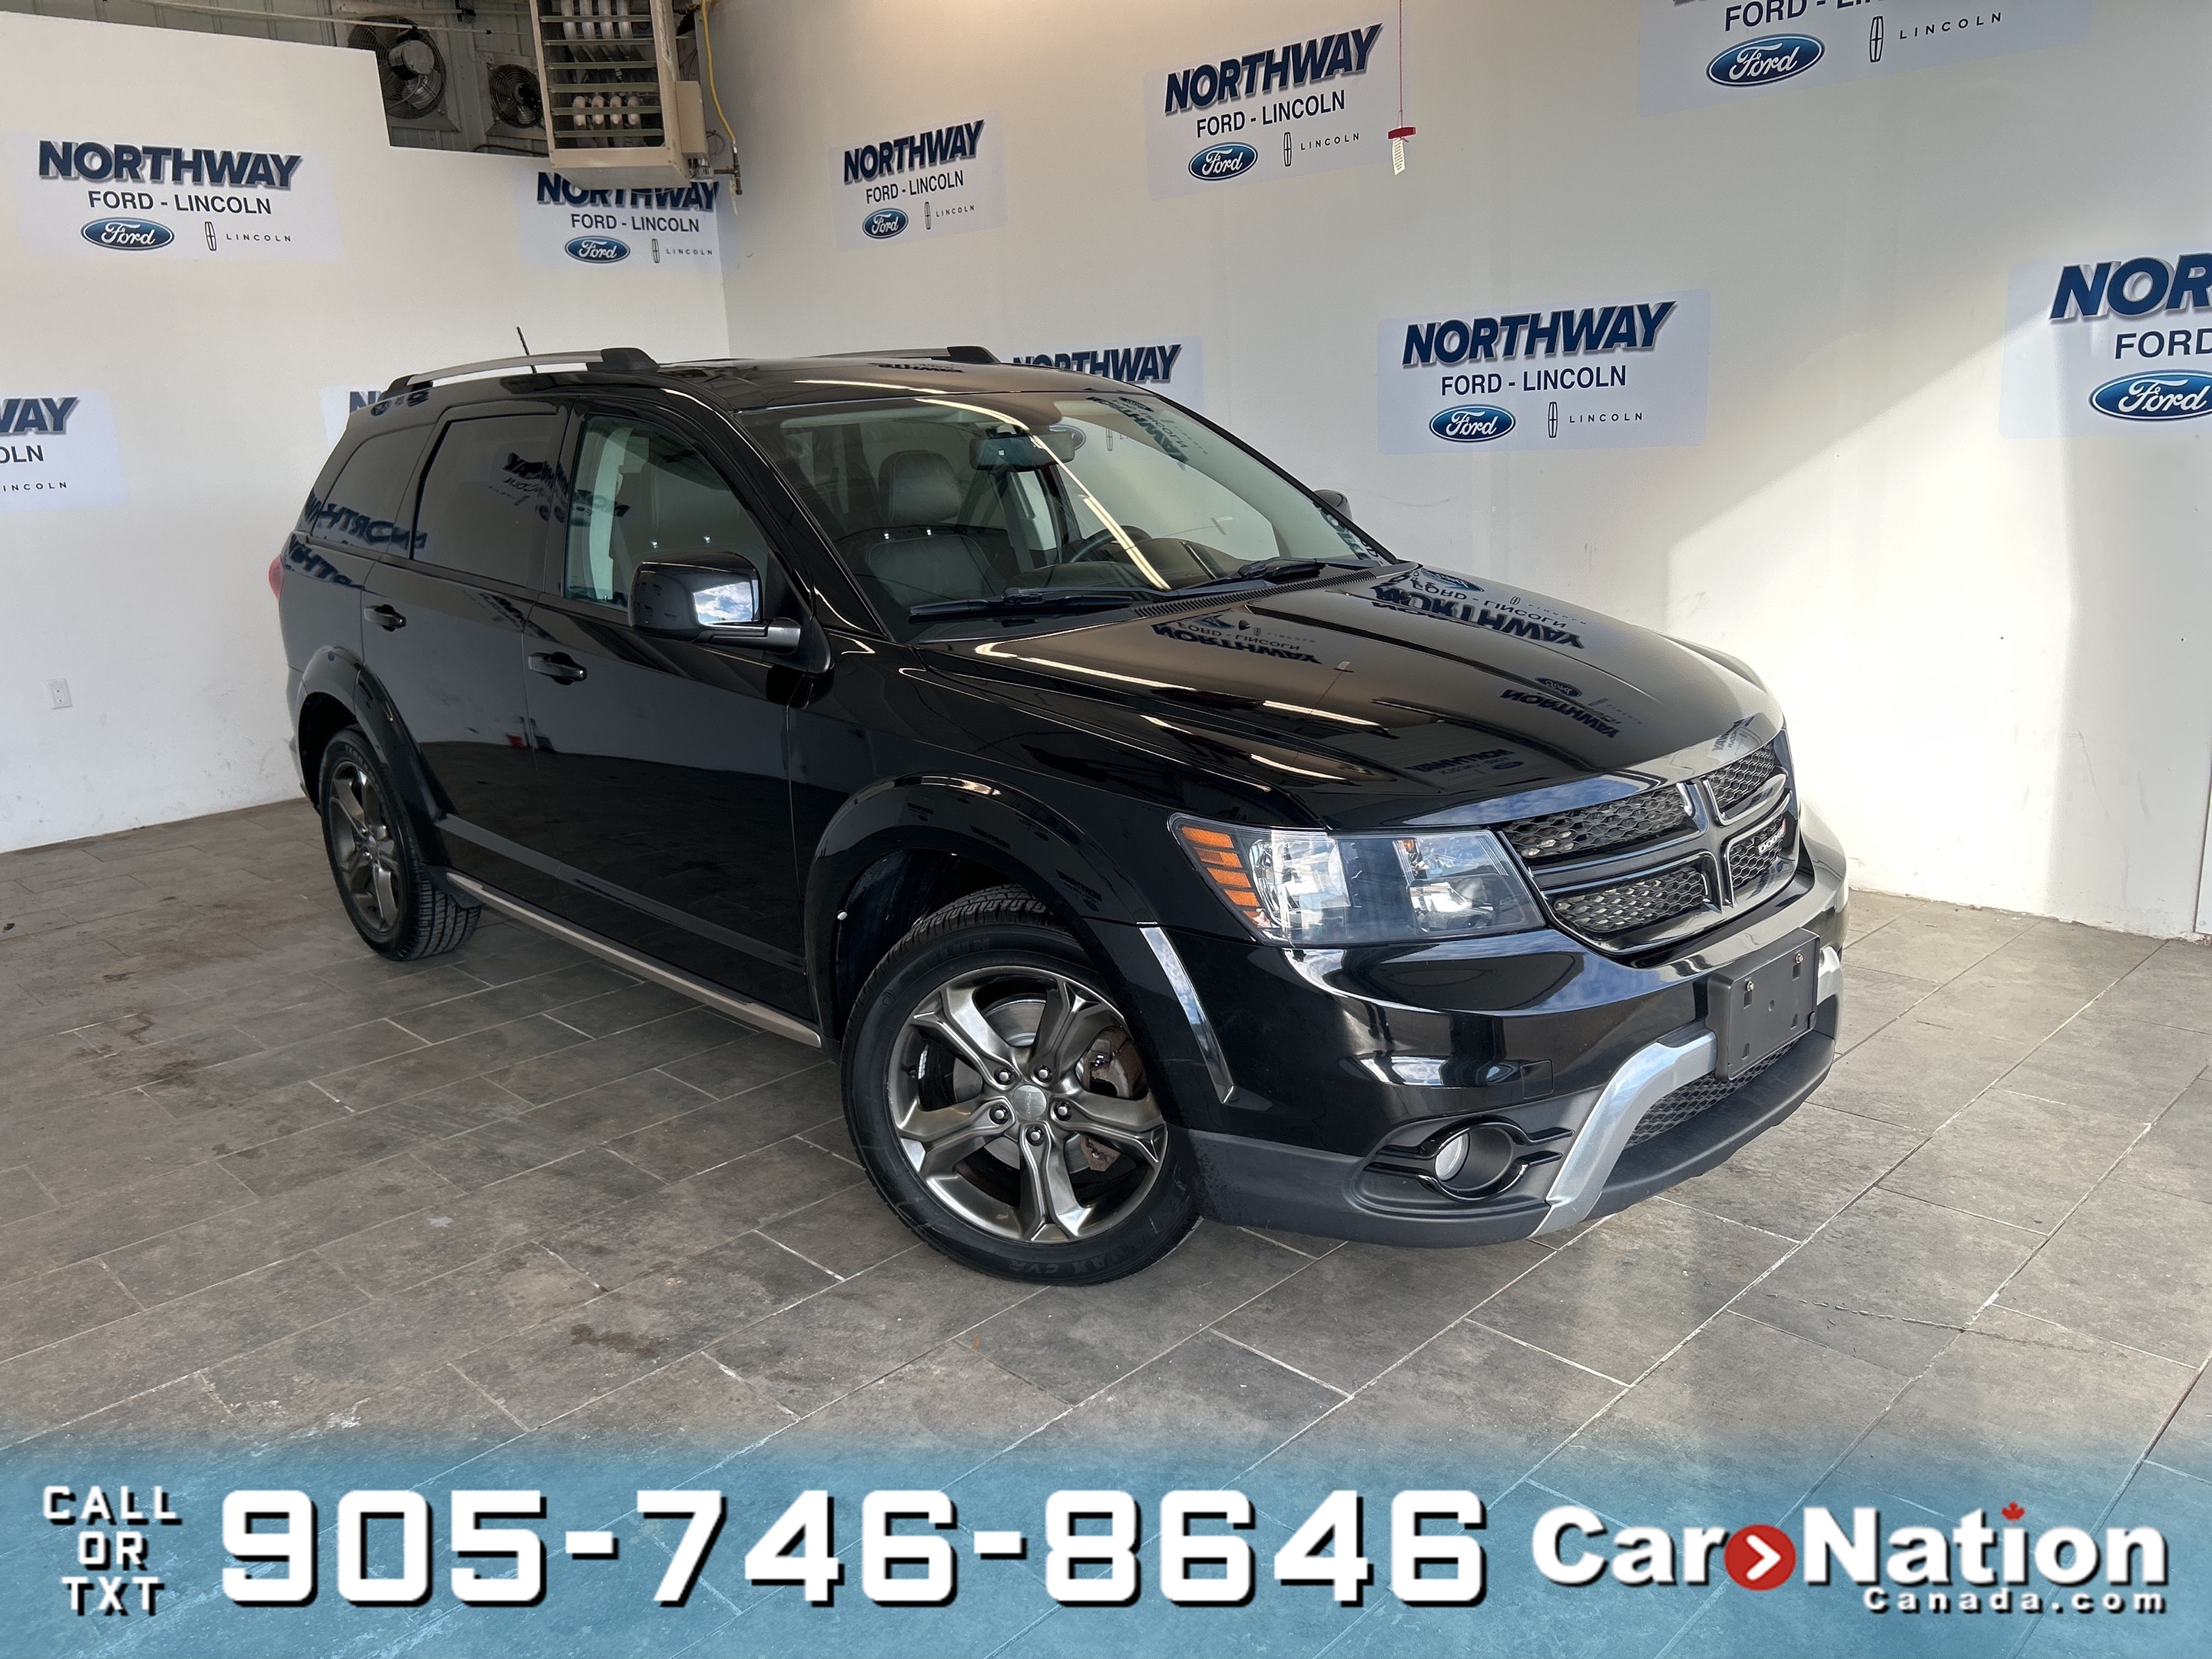 2015 Dodge Journey CROSSROAD |LEATHER | 8.4" SCREEN | SUNROOF |7 PASS